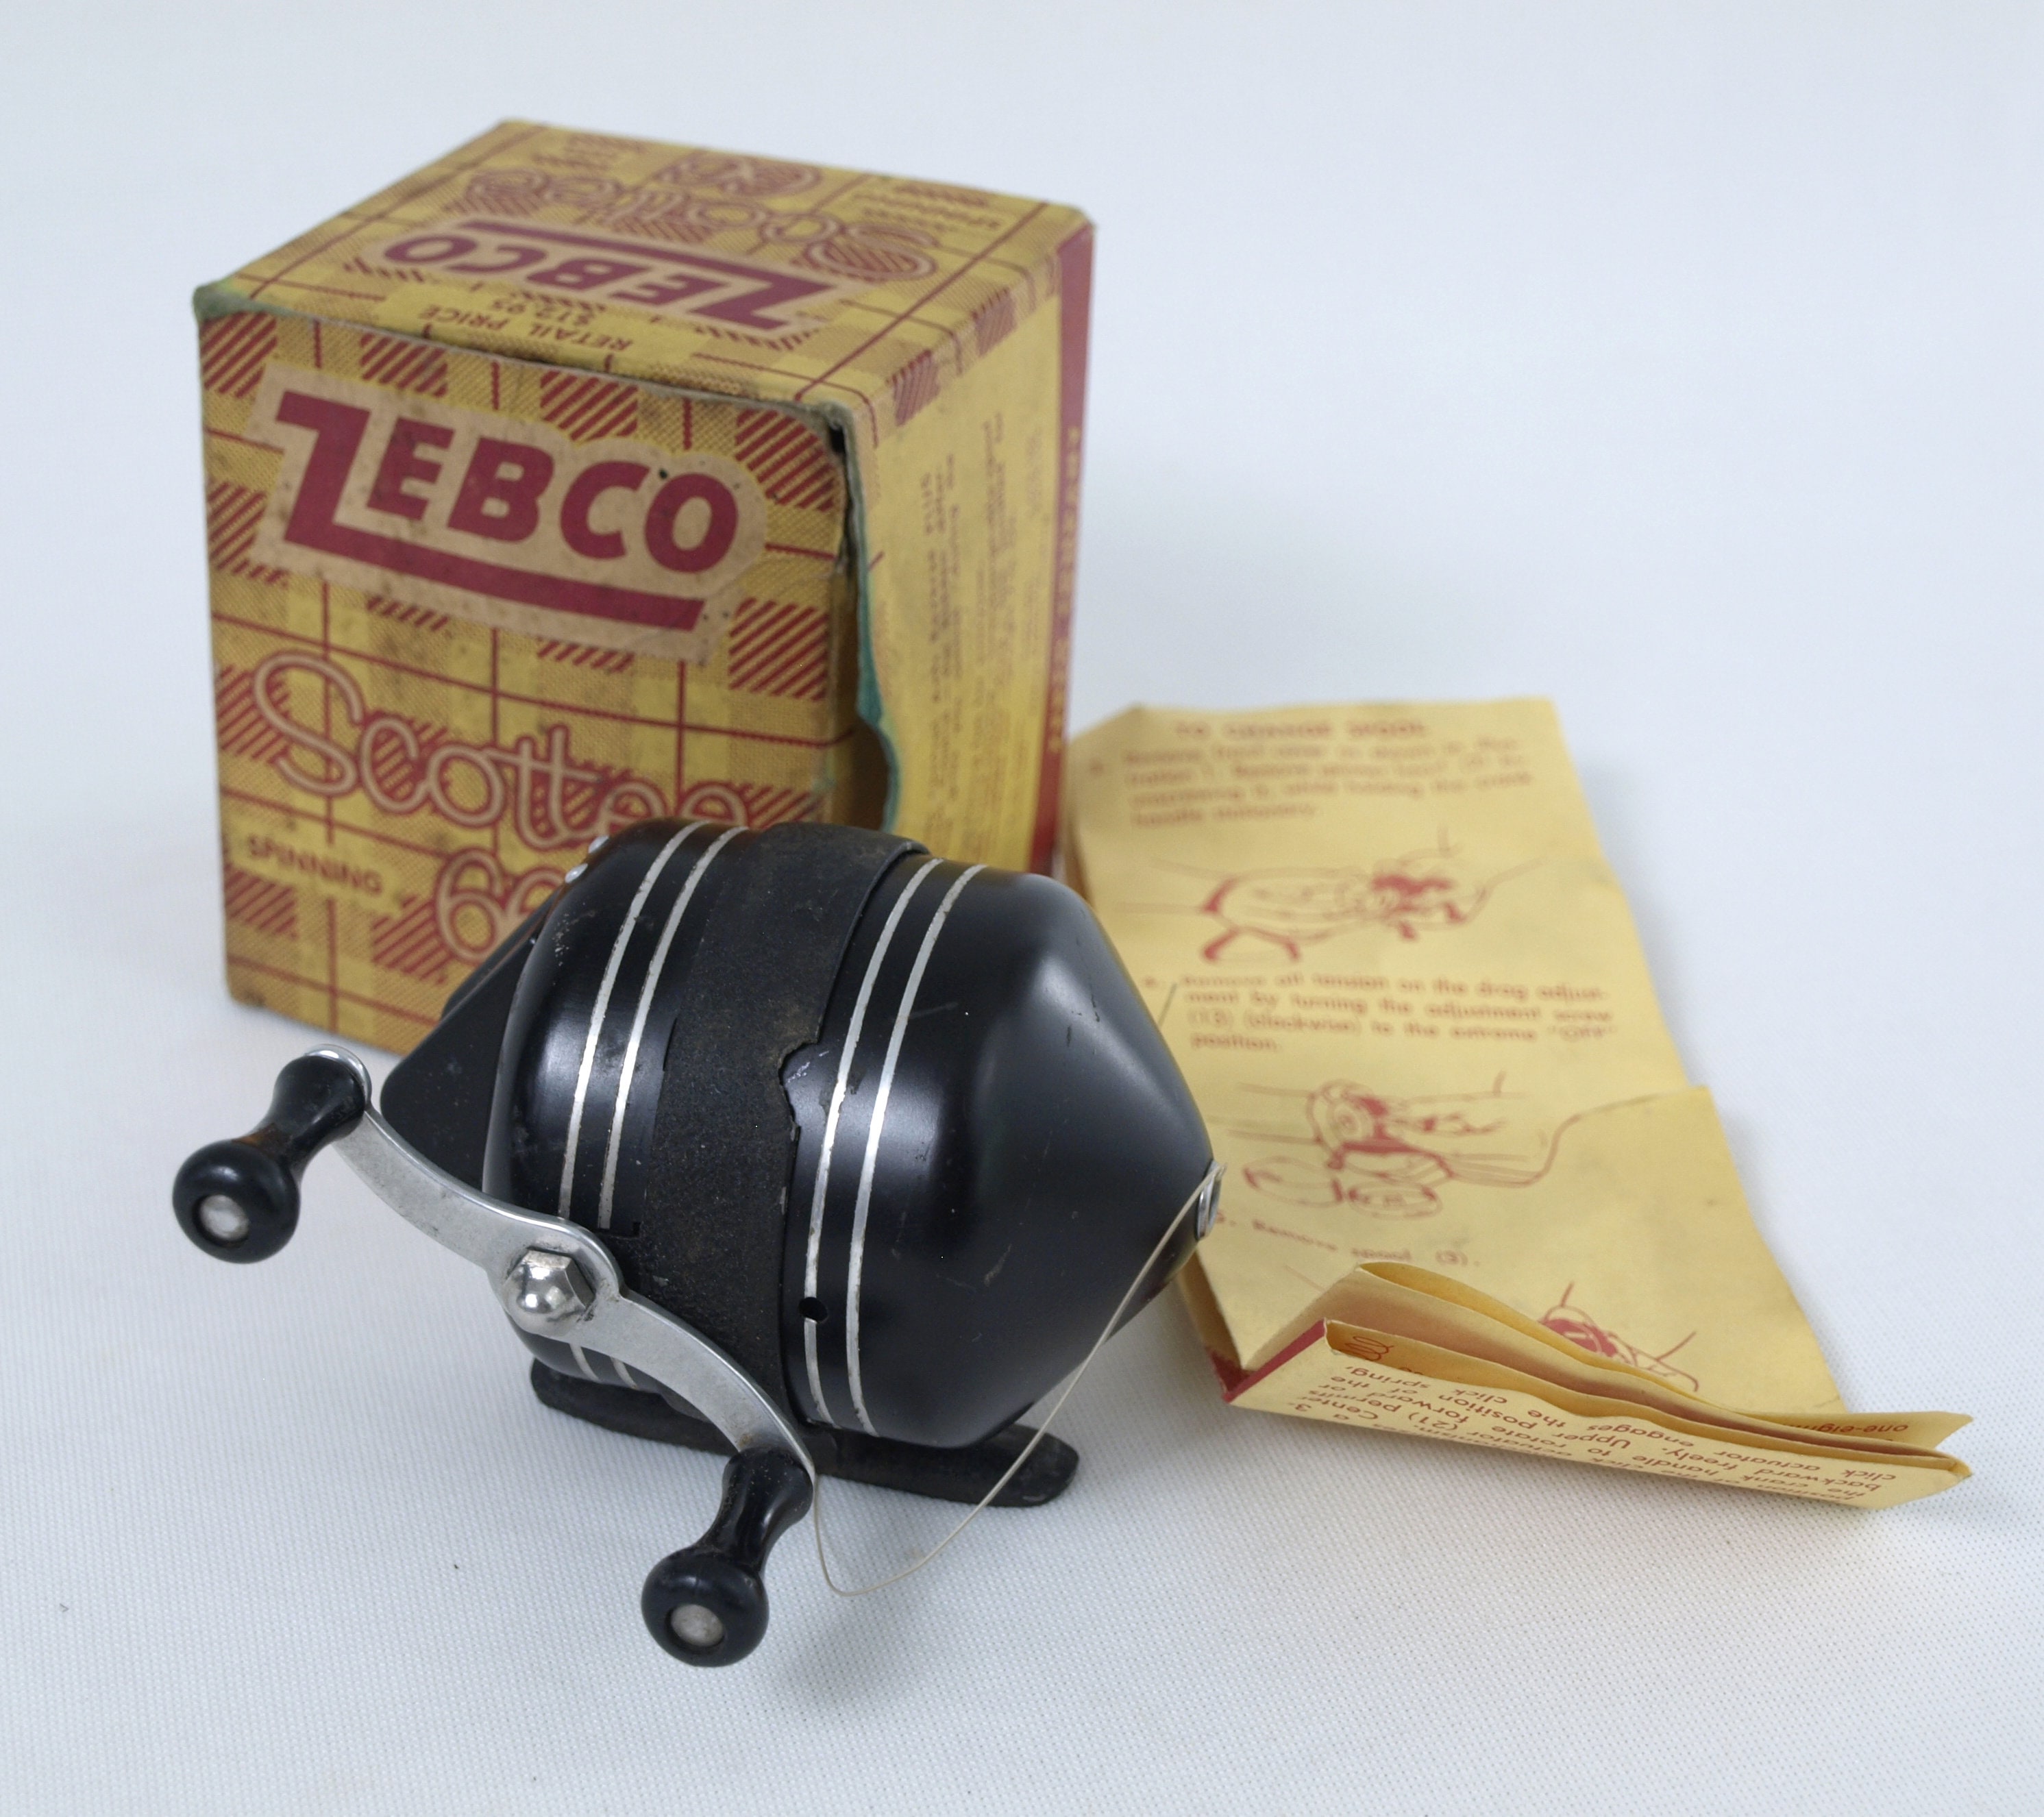 Vintage ZEBCO scottee 66 Spinning Reel in Original Box With Instructions,  Circa 1950's Fishing Gear & Outdoor Sporting VG Condition 